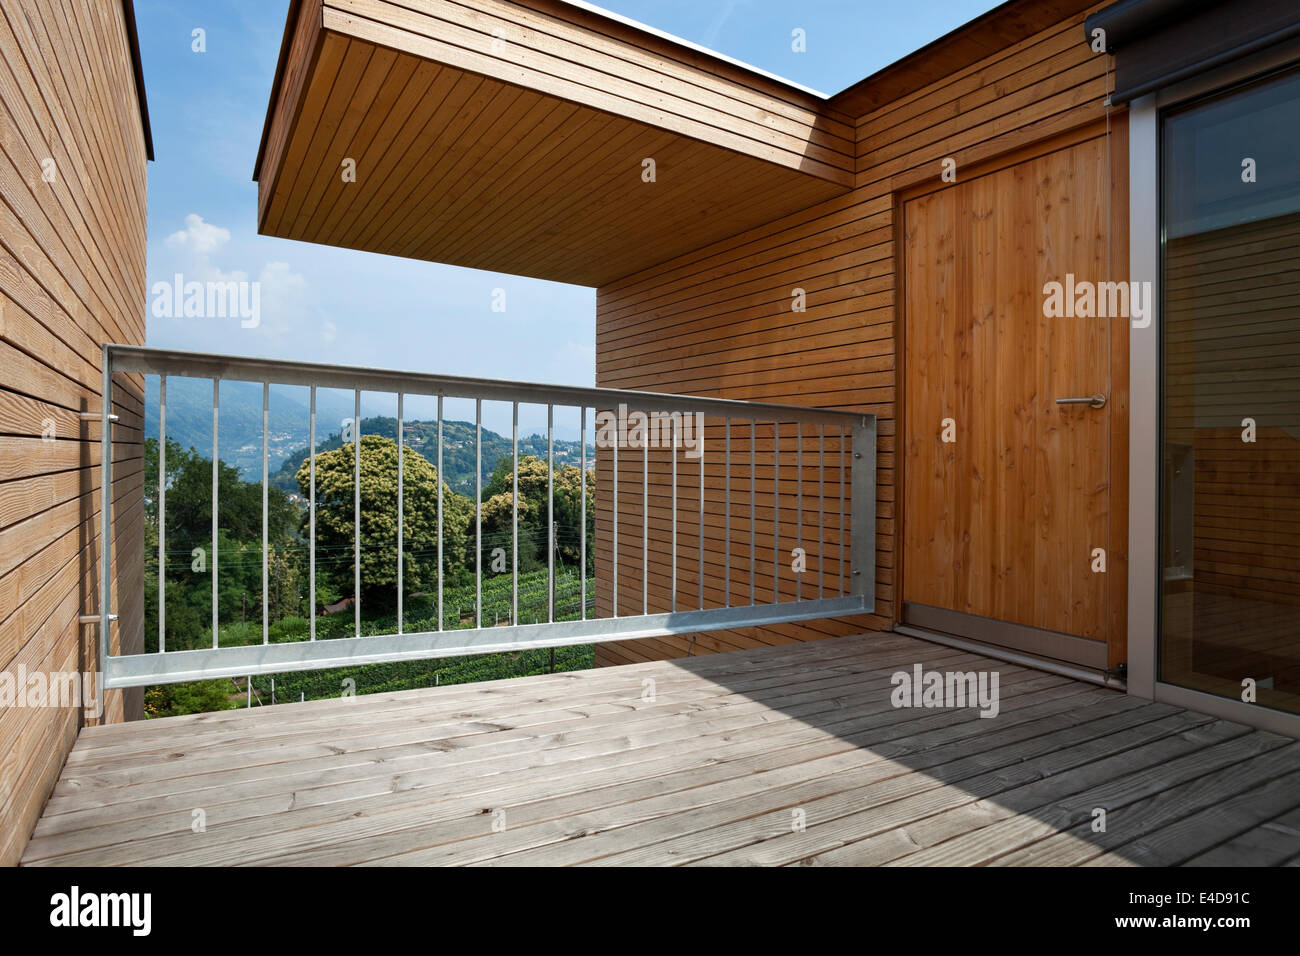 totally wooden terrace of a new modern and sustainable building Stock Photo